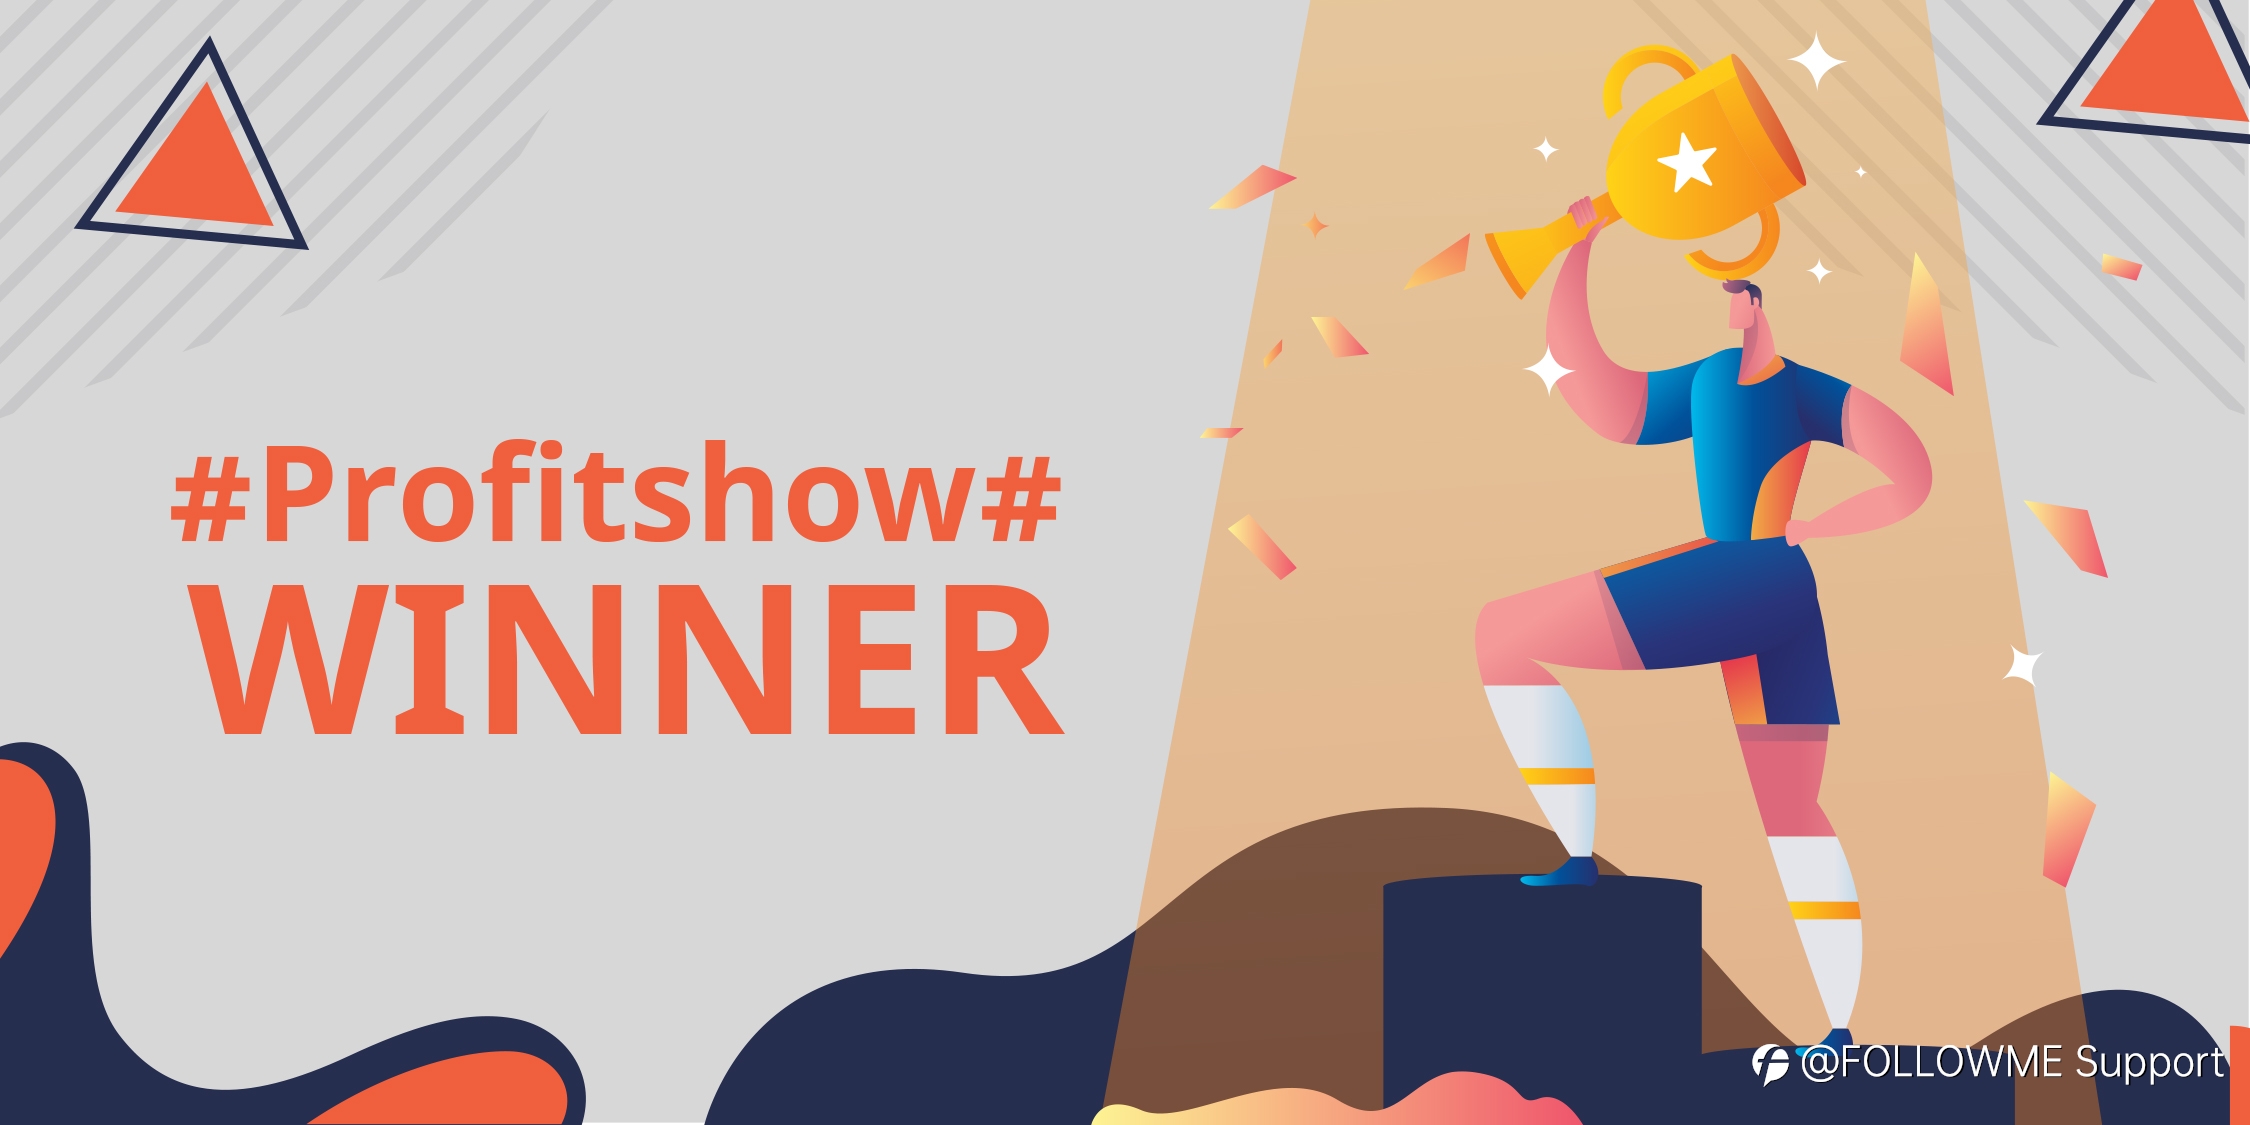 Featured #Profitshow# Winners of the Second Week!